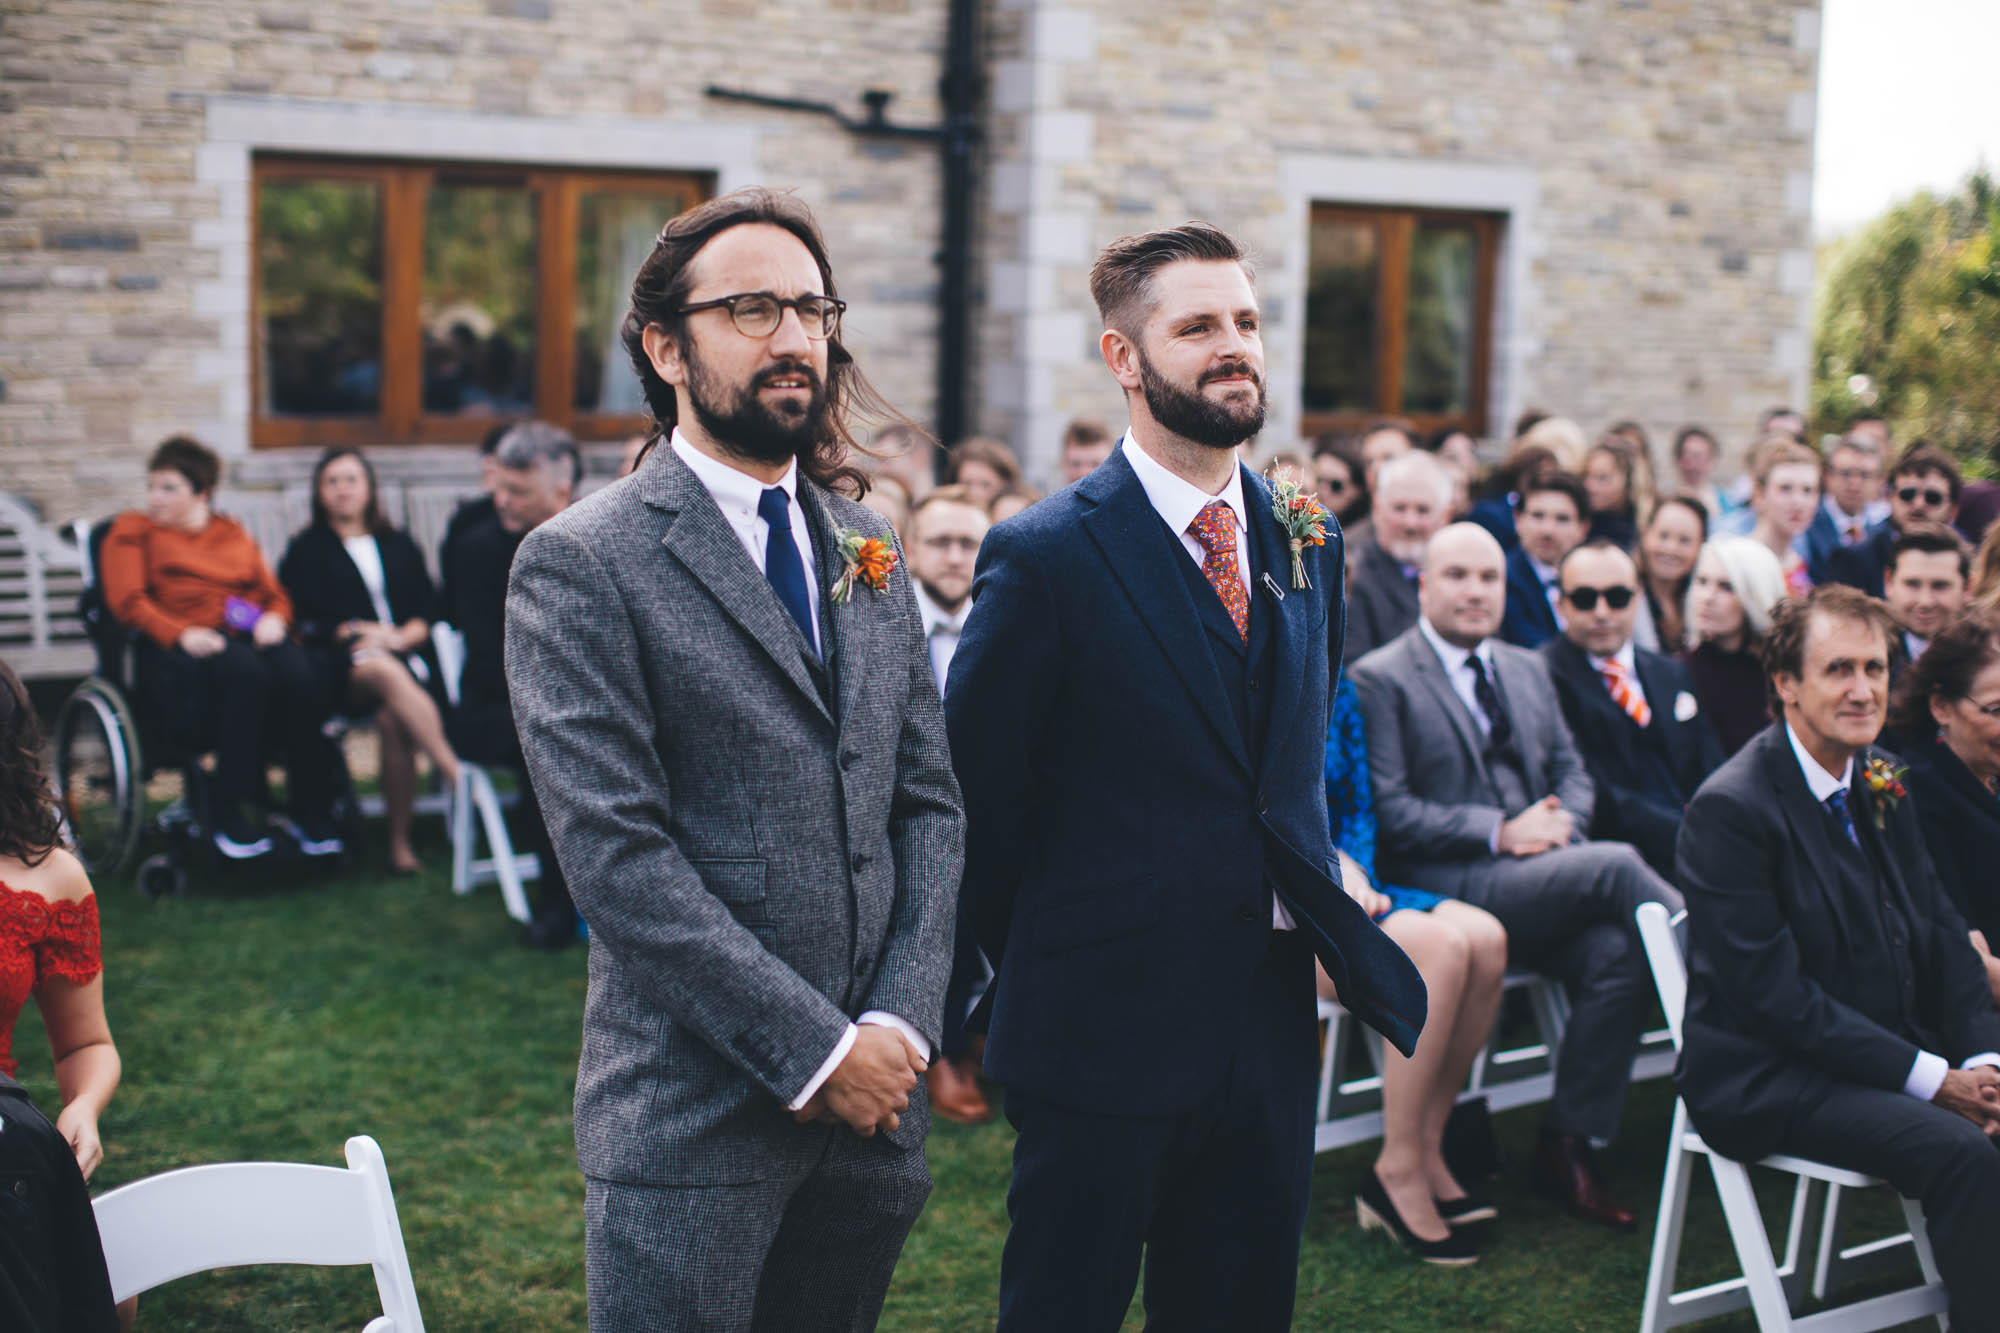 groom and best man look serious as they wait for the wedding ceremony to start